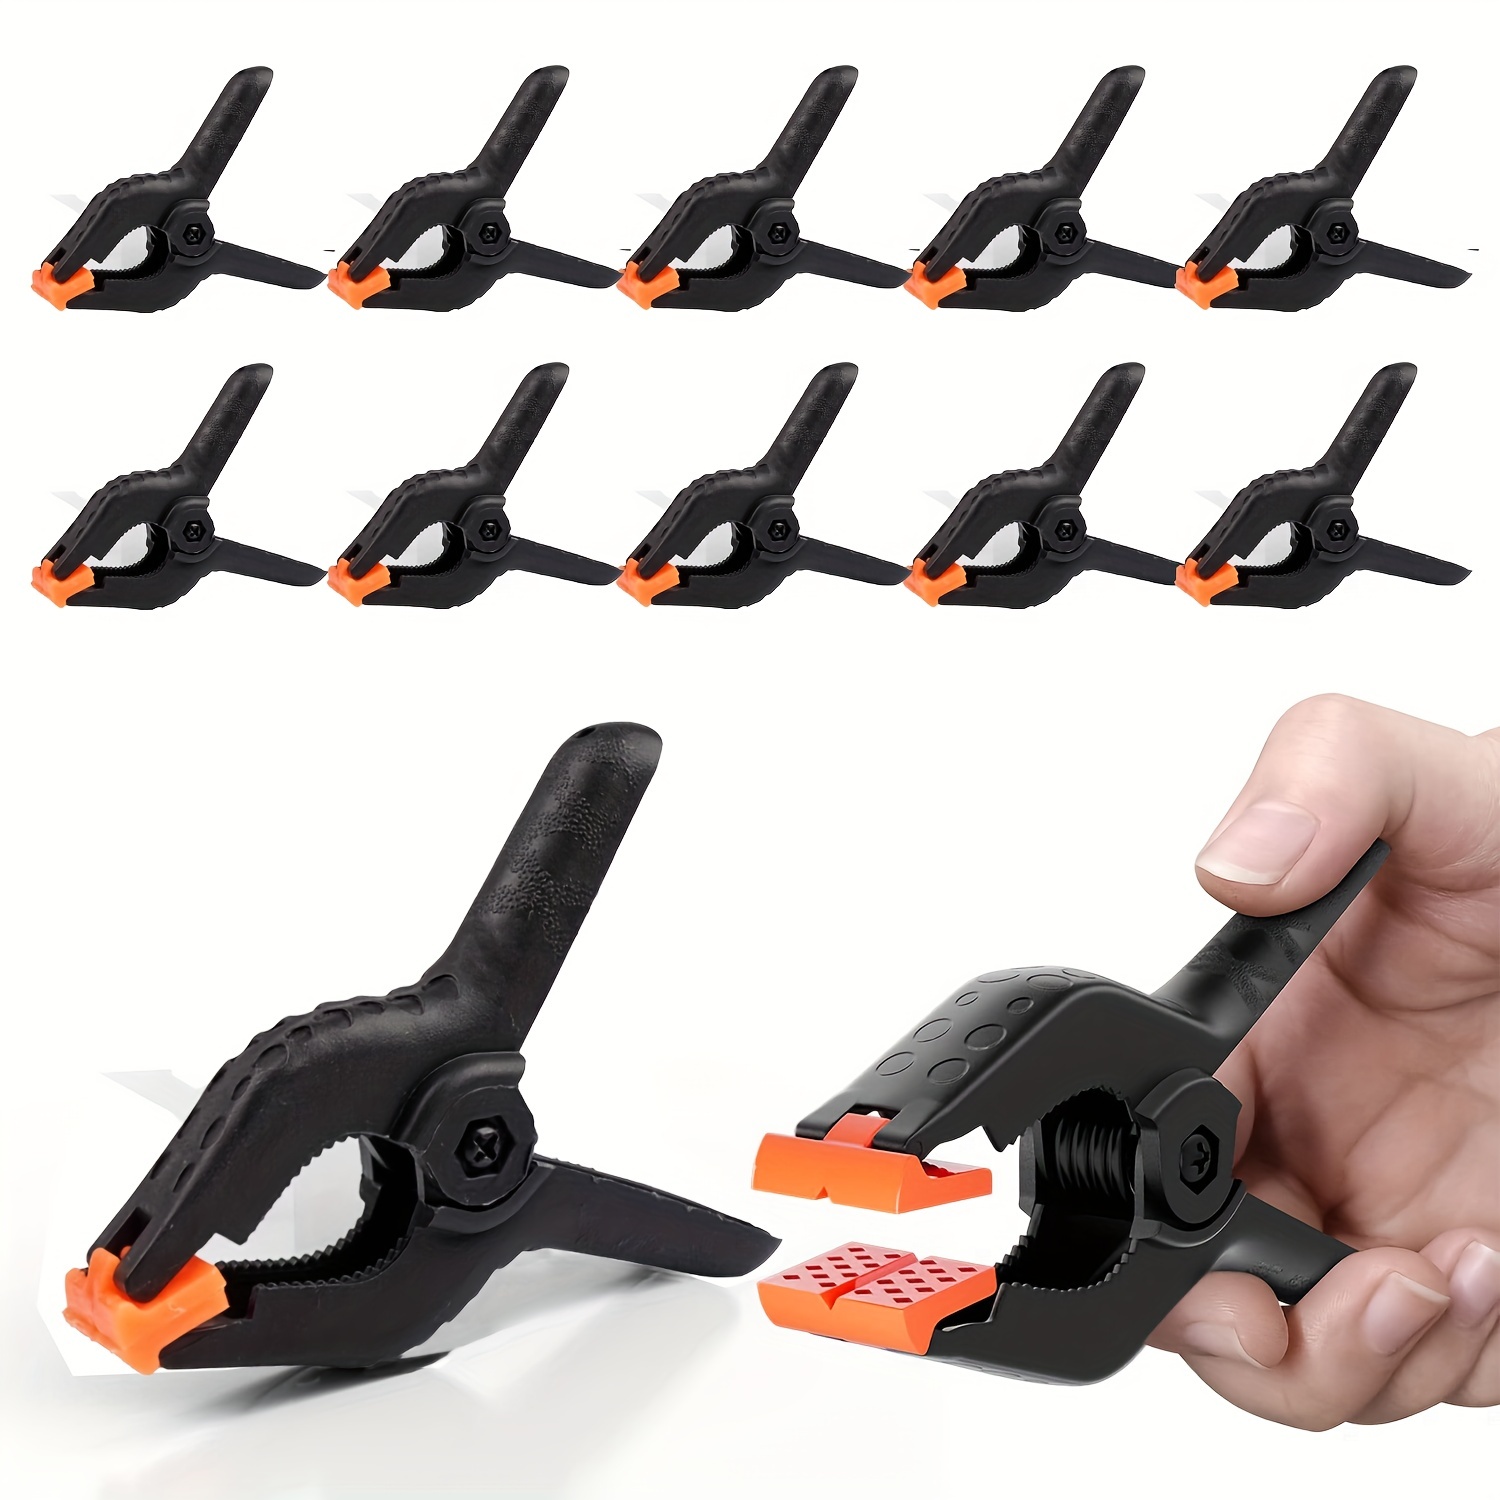 Strong Metal Clip Wide-mouth Spring Clamps for Photo Studio